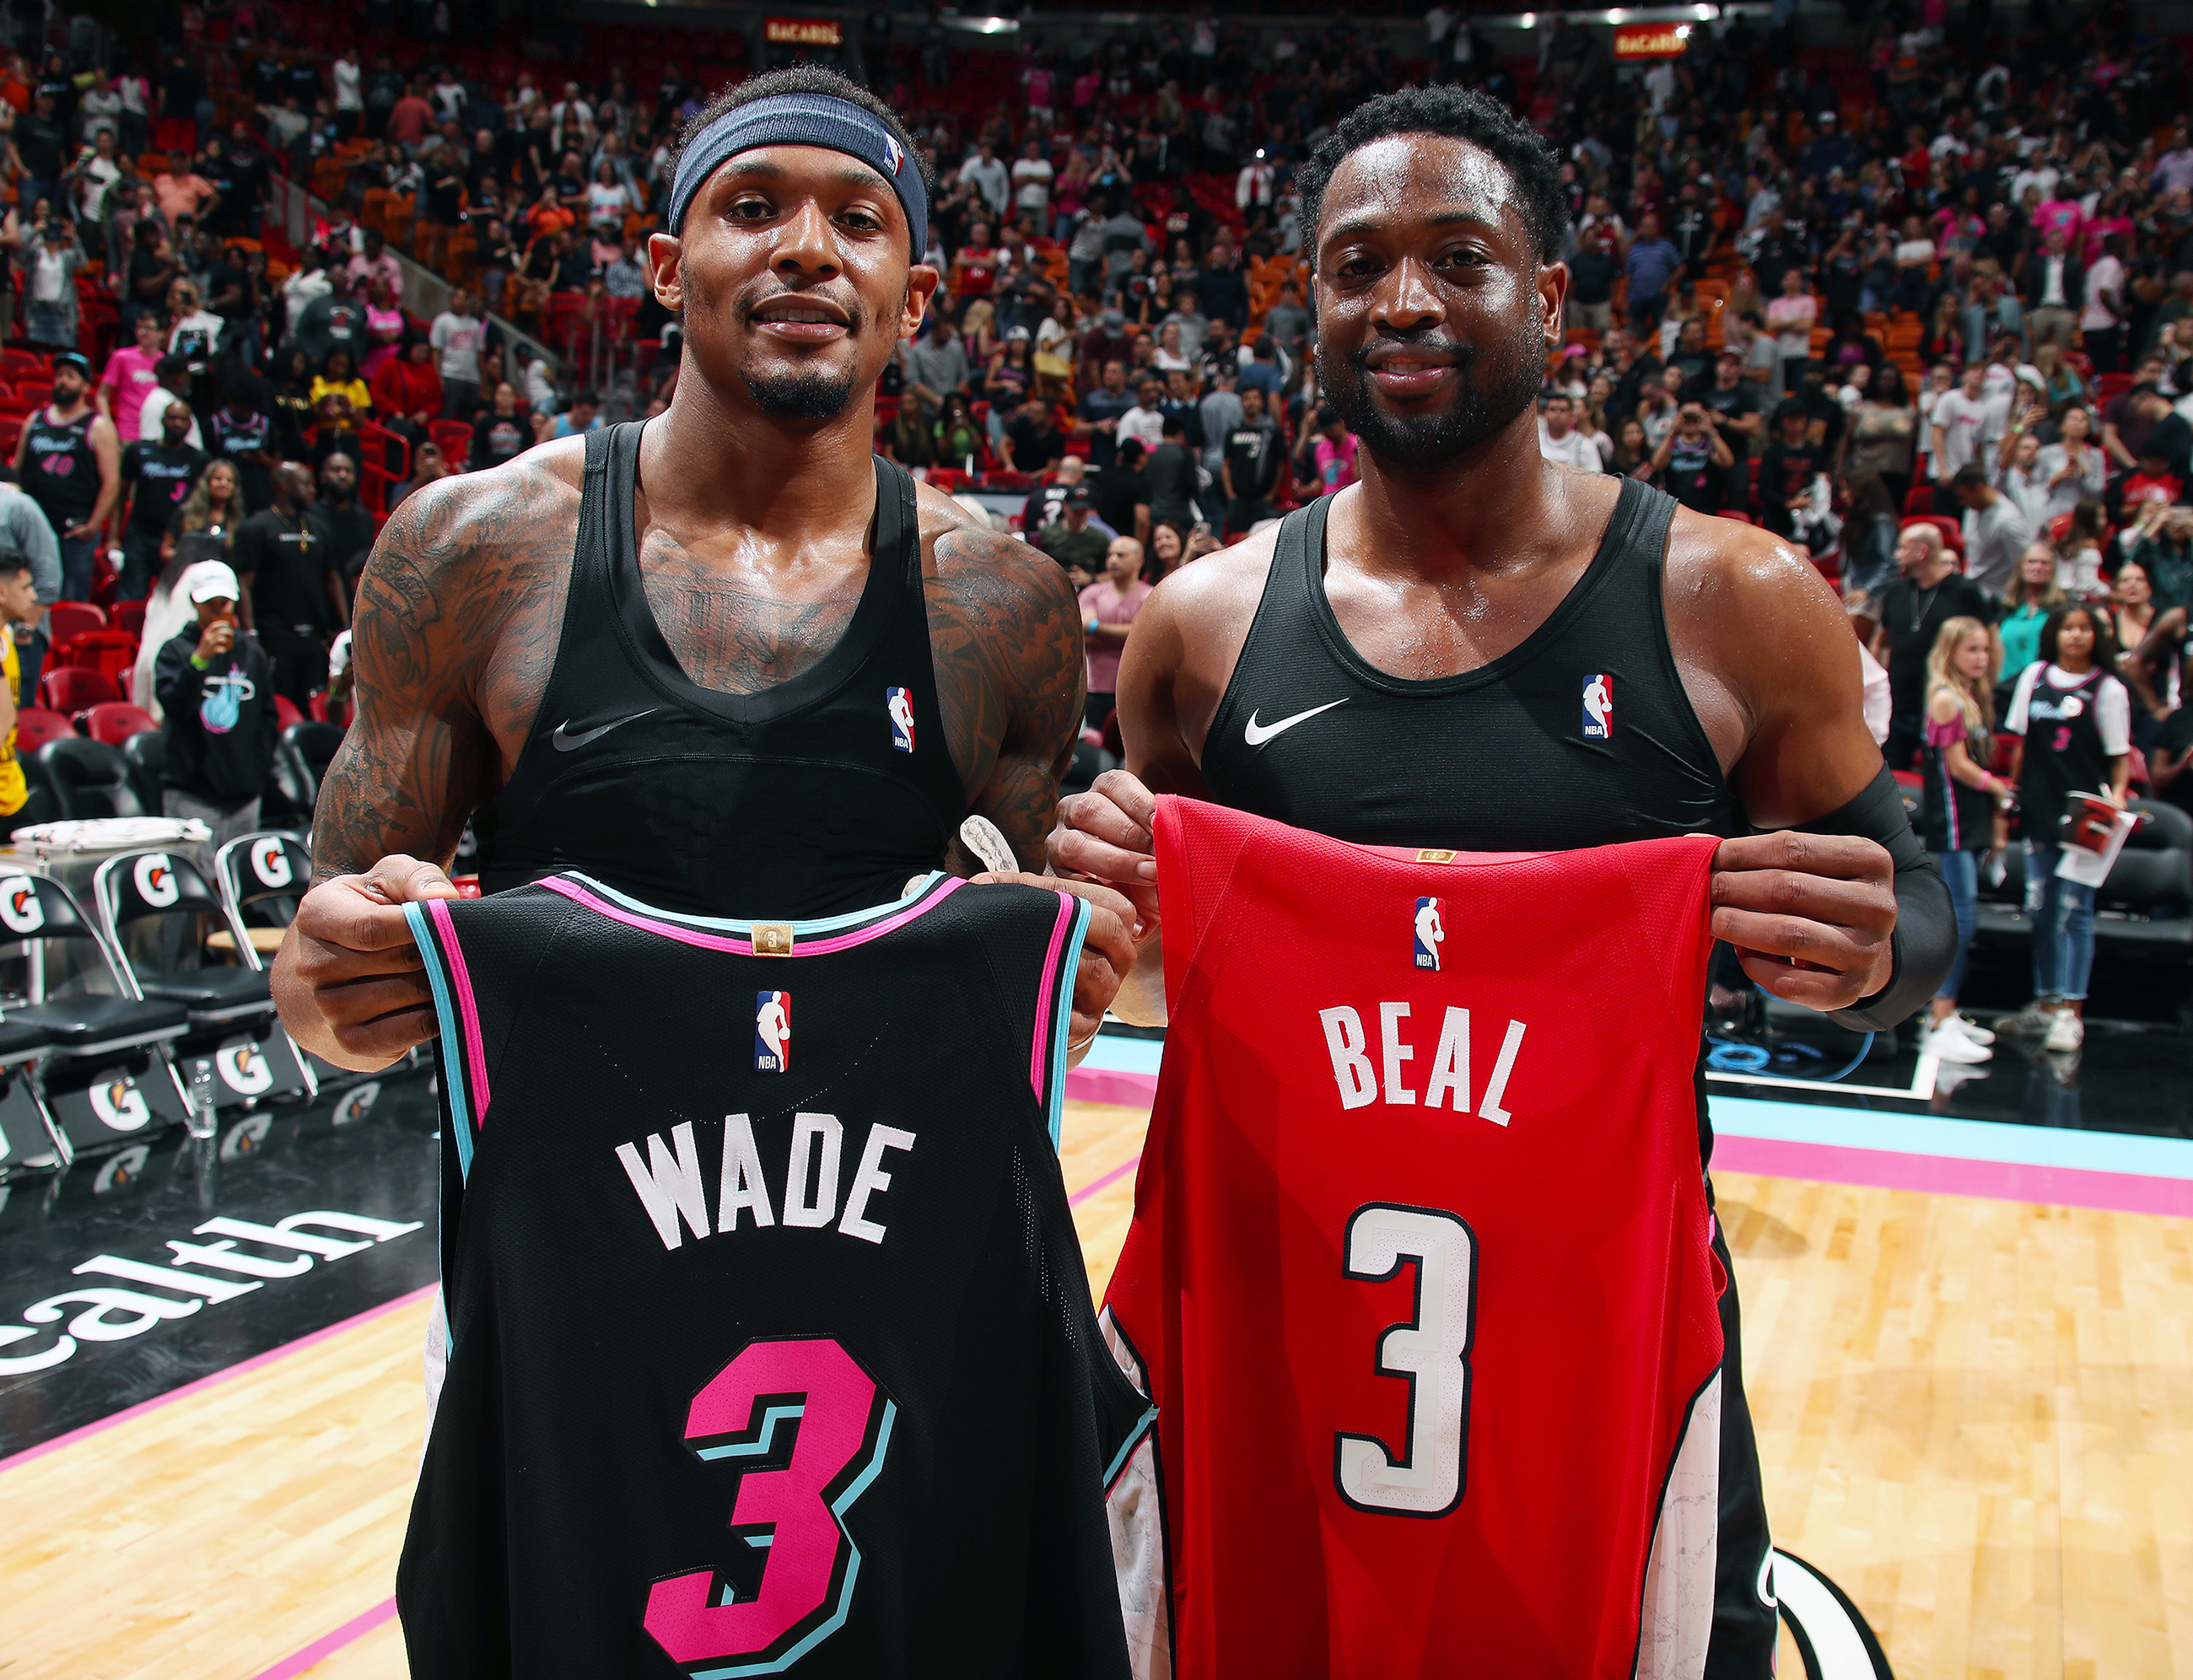 Dwayne Wade Swapped Jerseys With NBA Legends as His Final Season Comes To an End ...